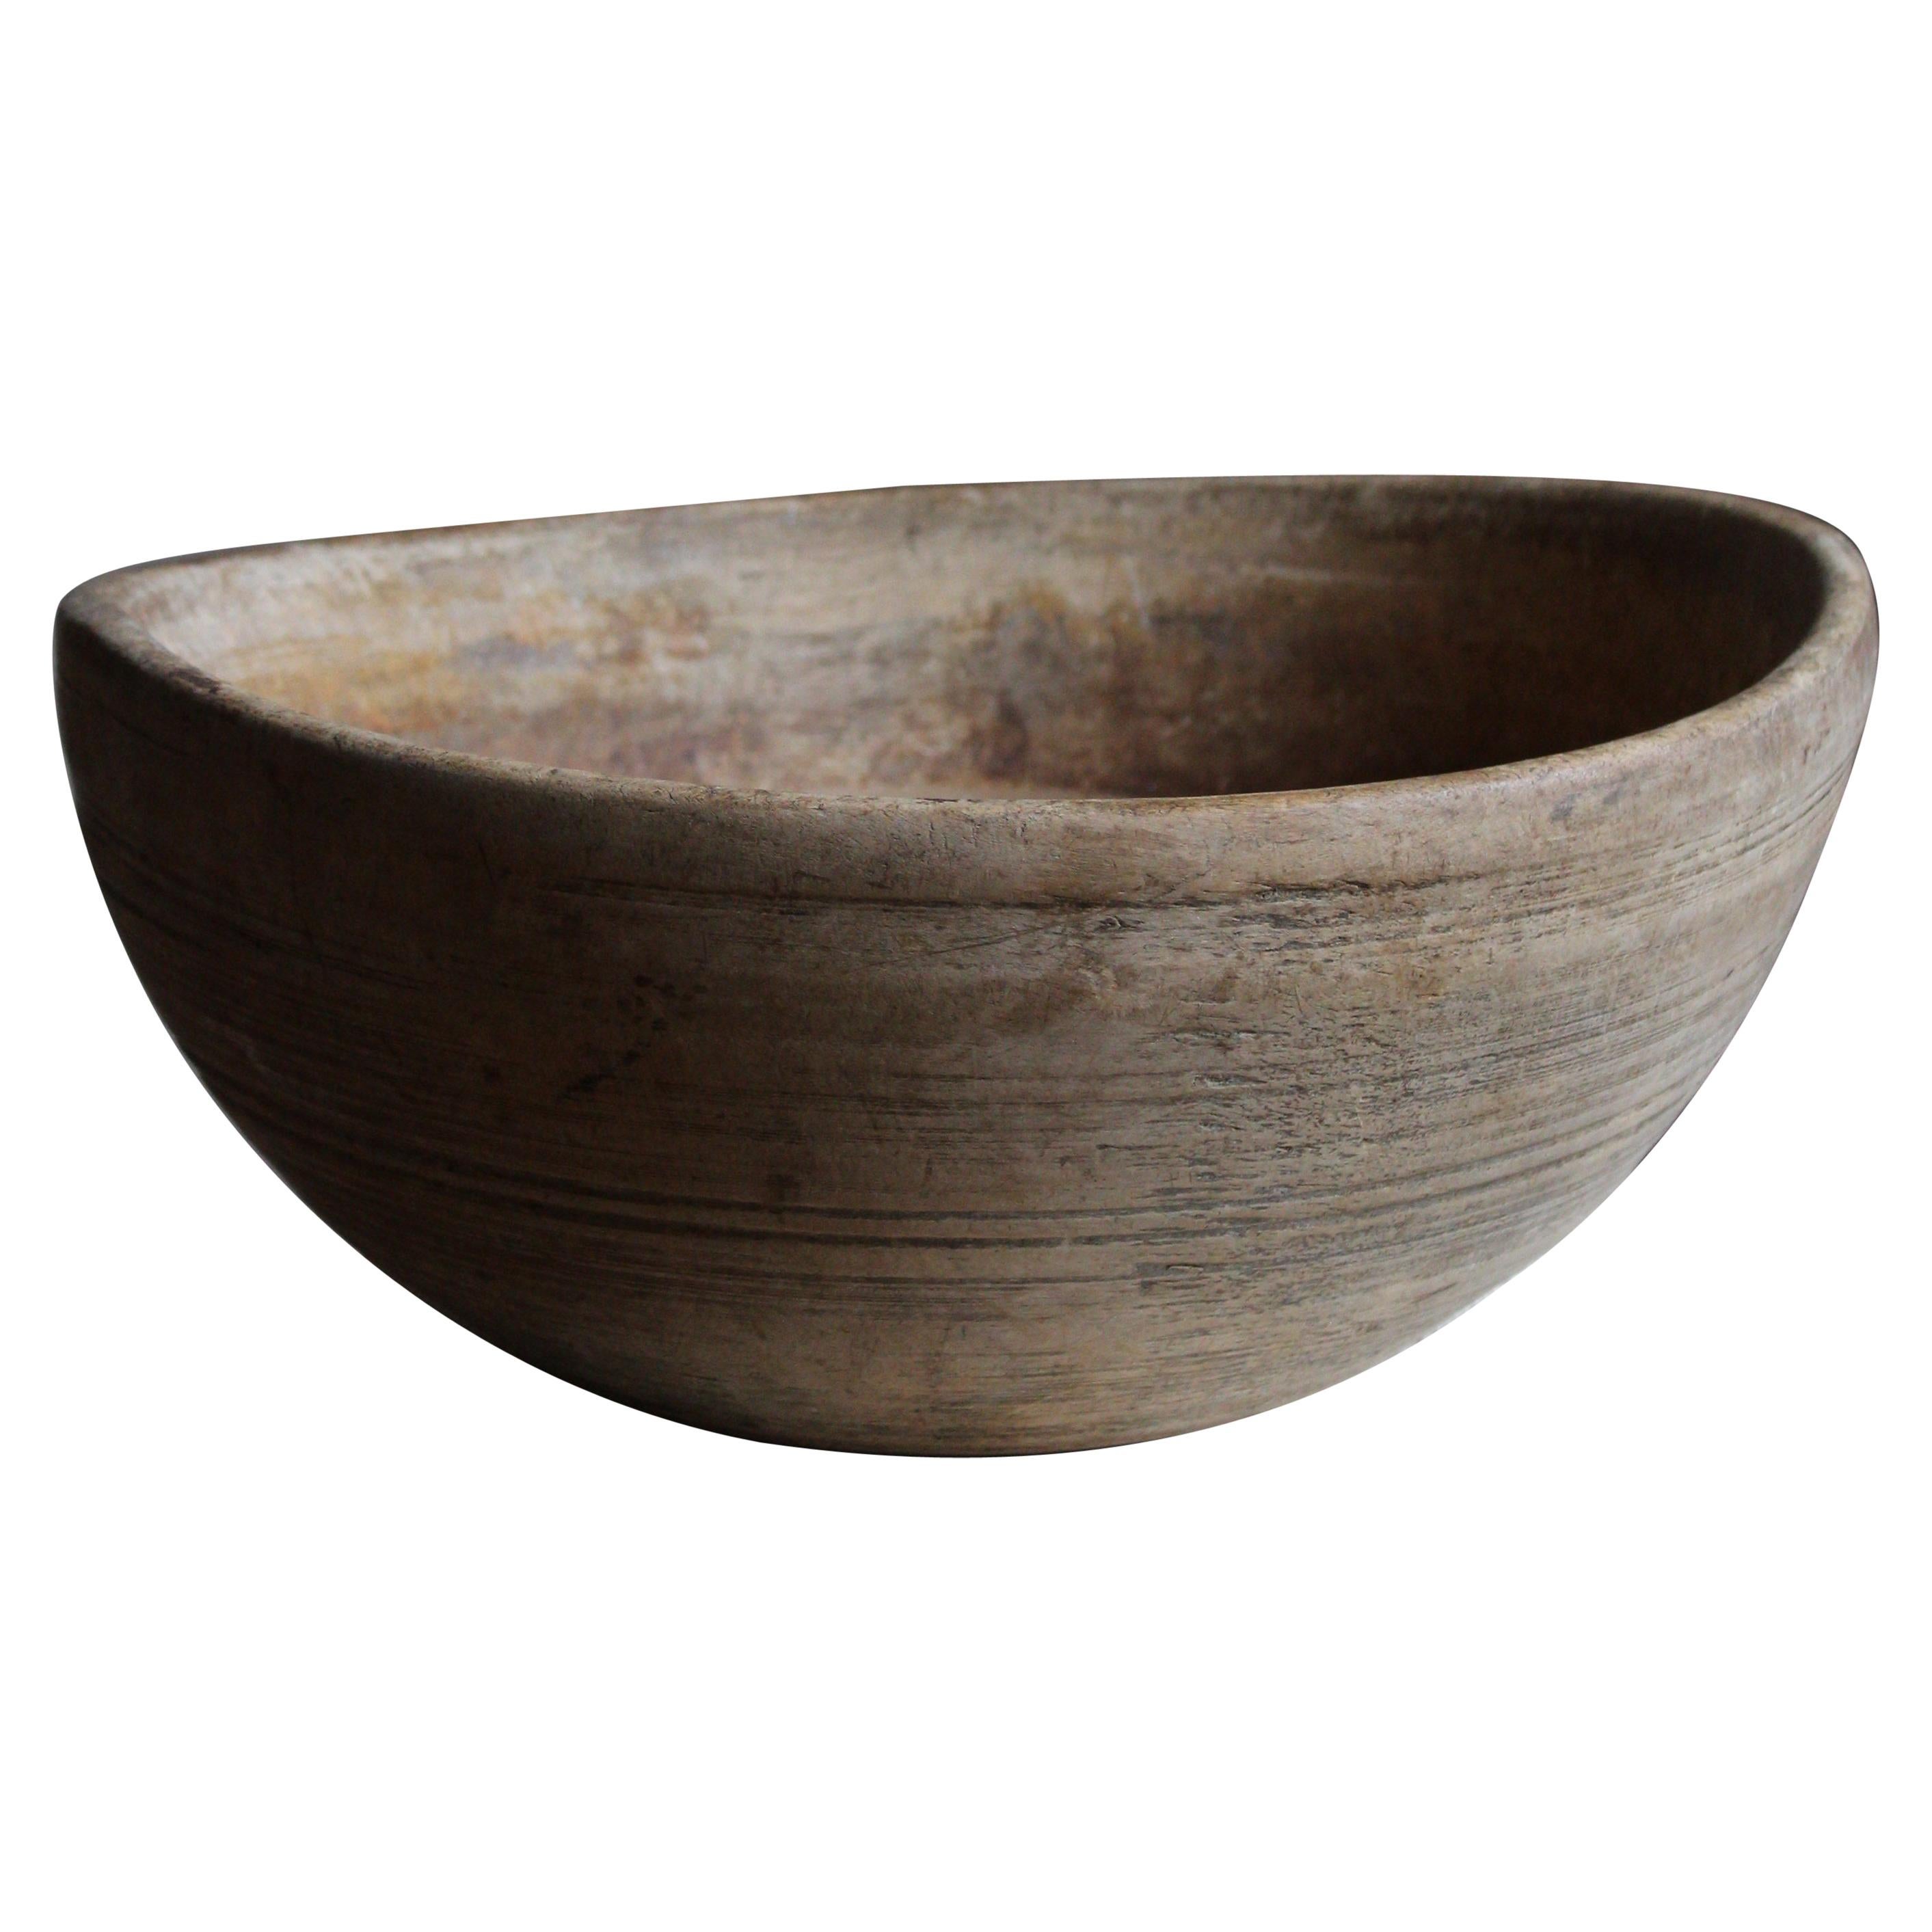 Swedish Craft, Unique Sizable and Deep Bowl, Wood, Sweden, 19th Century